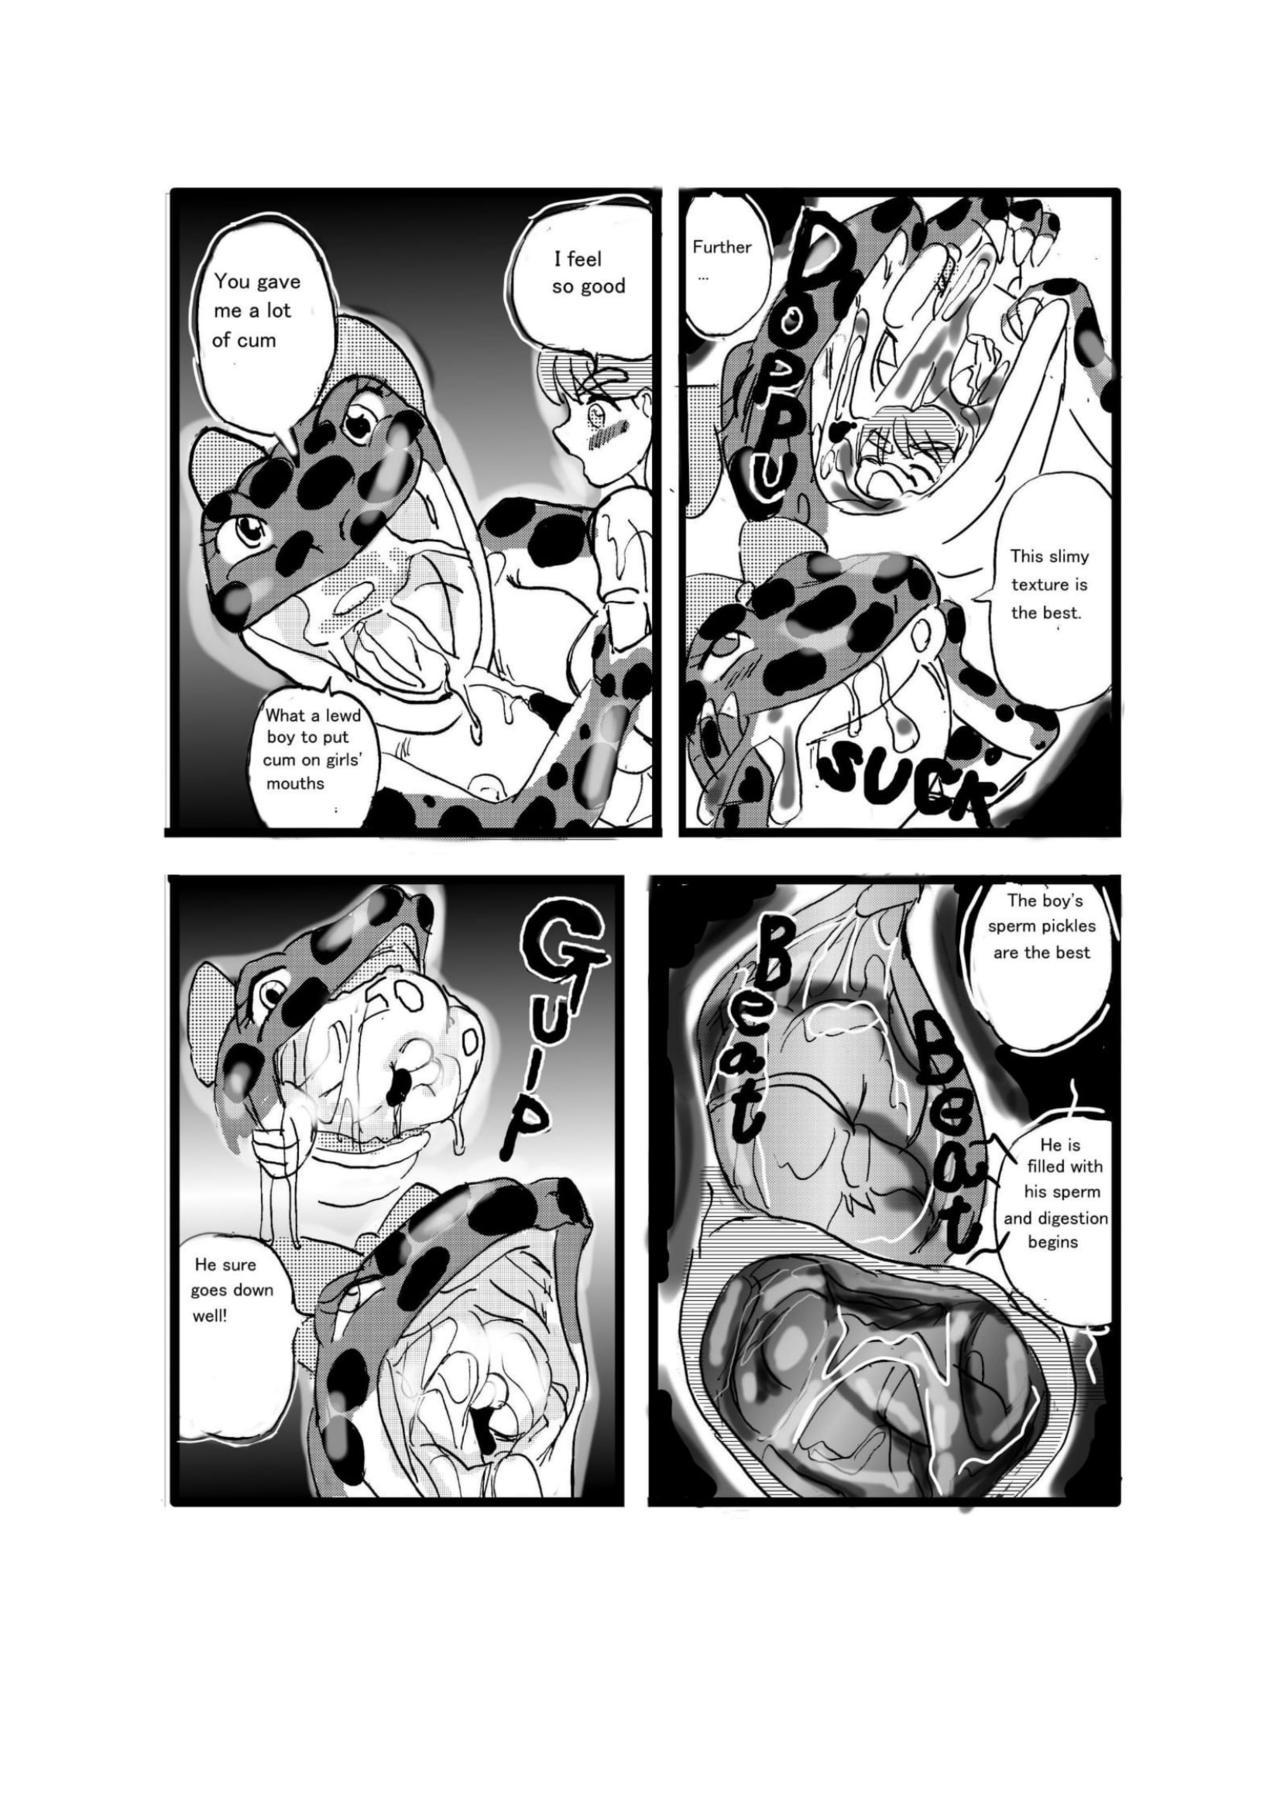 Anal Porn Swallowed Whole vol.2 Waniko + What's Digestion? - Original 4some - Page 8